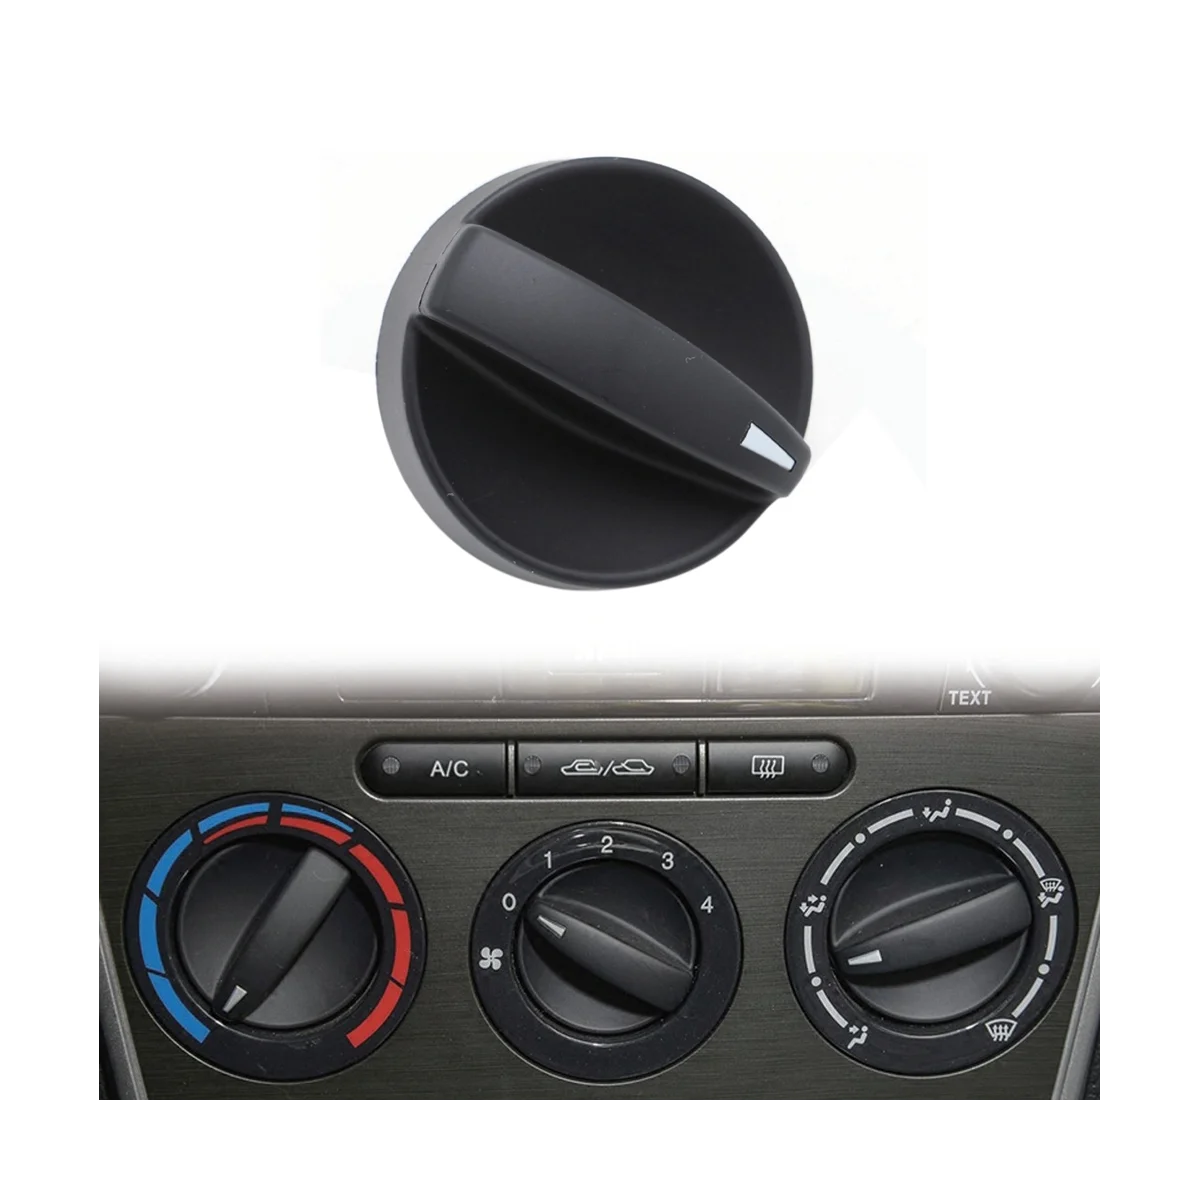 

3Pcs Car A/C Heater Climate Control Switch Knobs Dials Cover for 2006-2008 Mazda 6 GV2W-61-195 GV3A-61-195